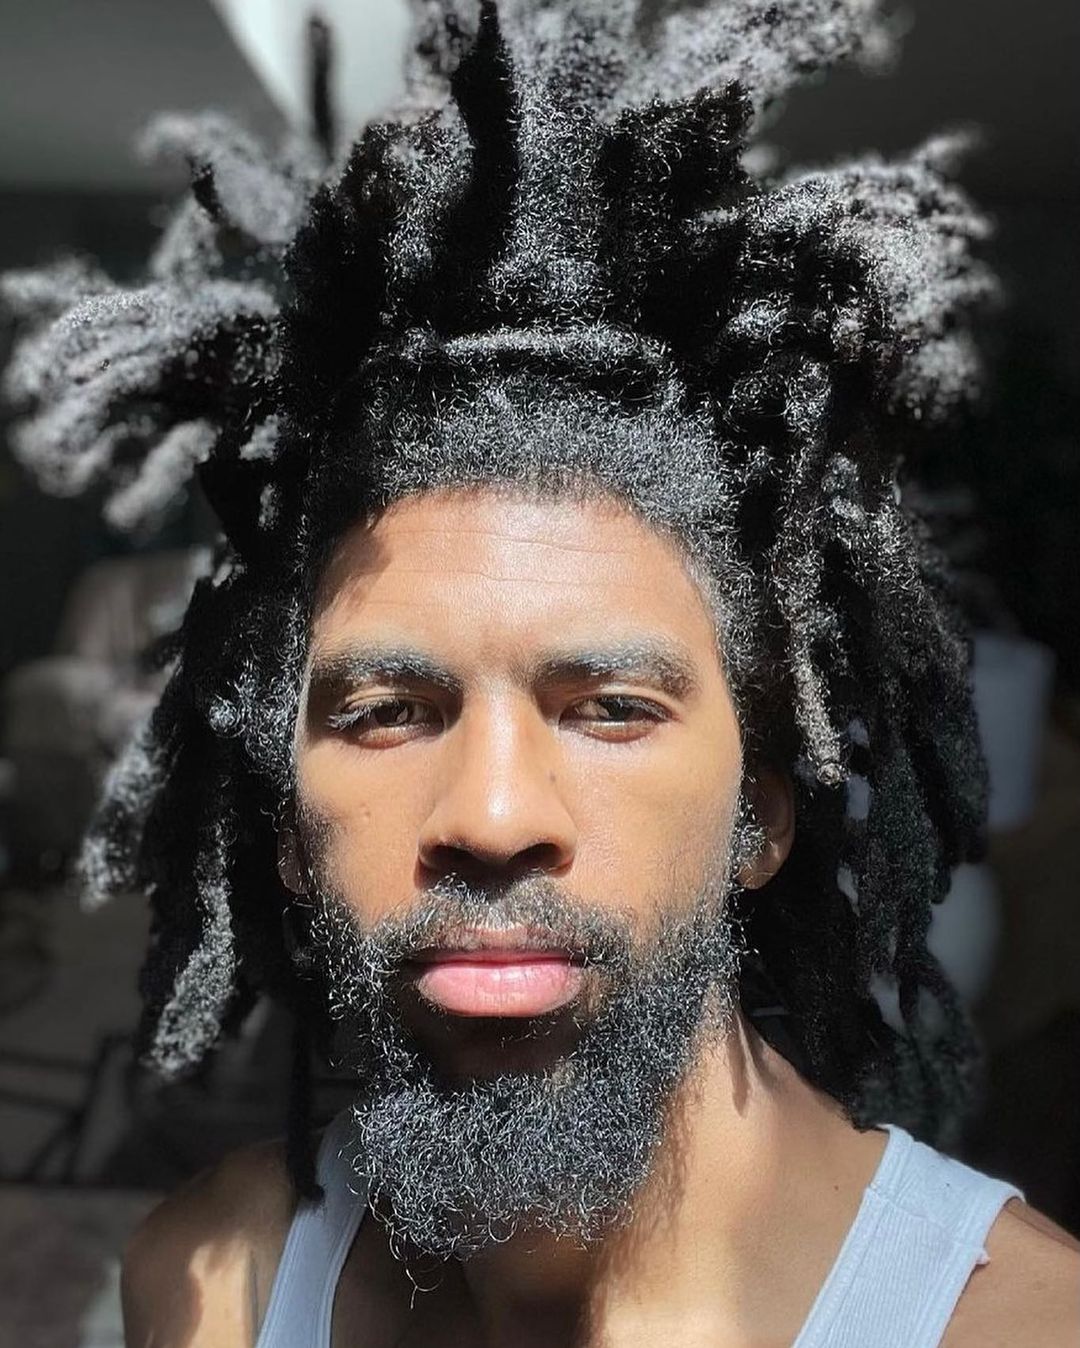 Man with fuzzy freeform locs in a white tank top and really letting his thick hair flow